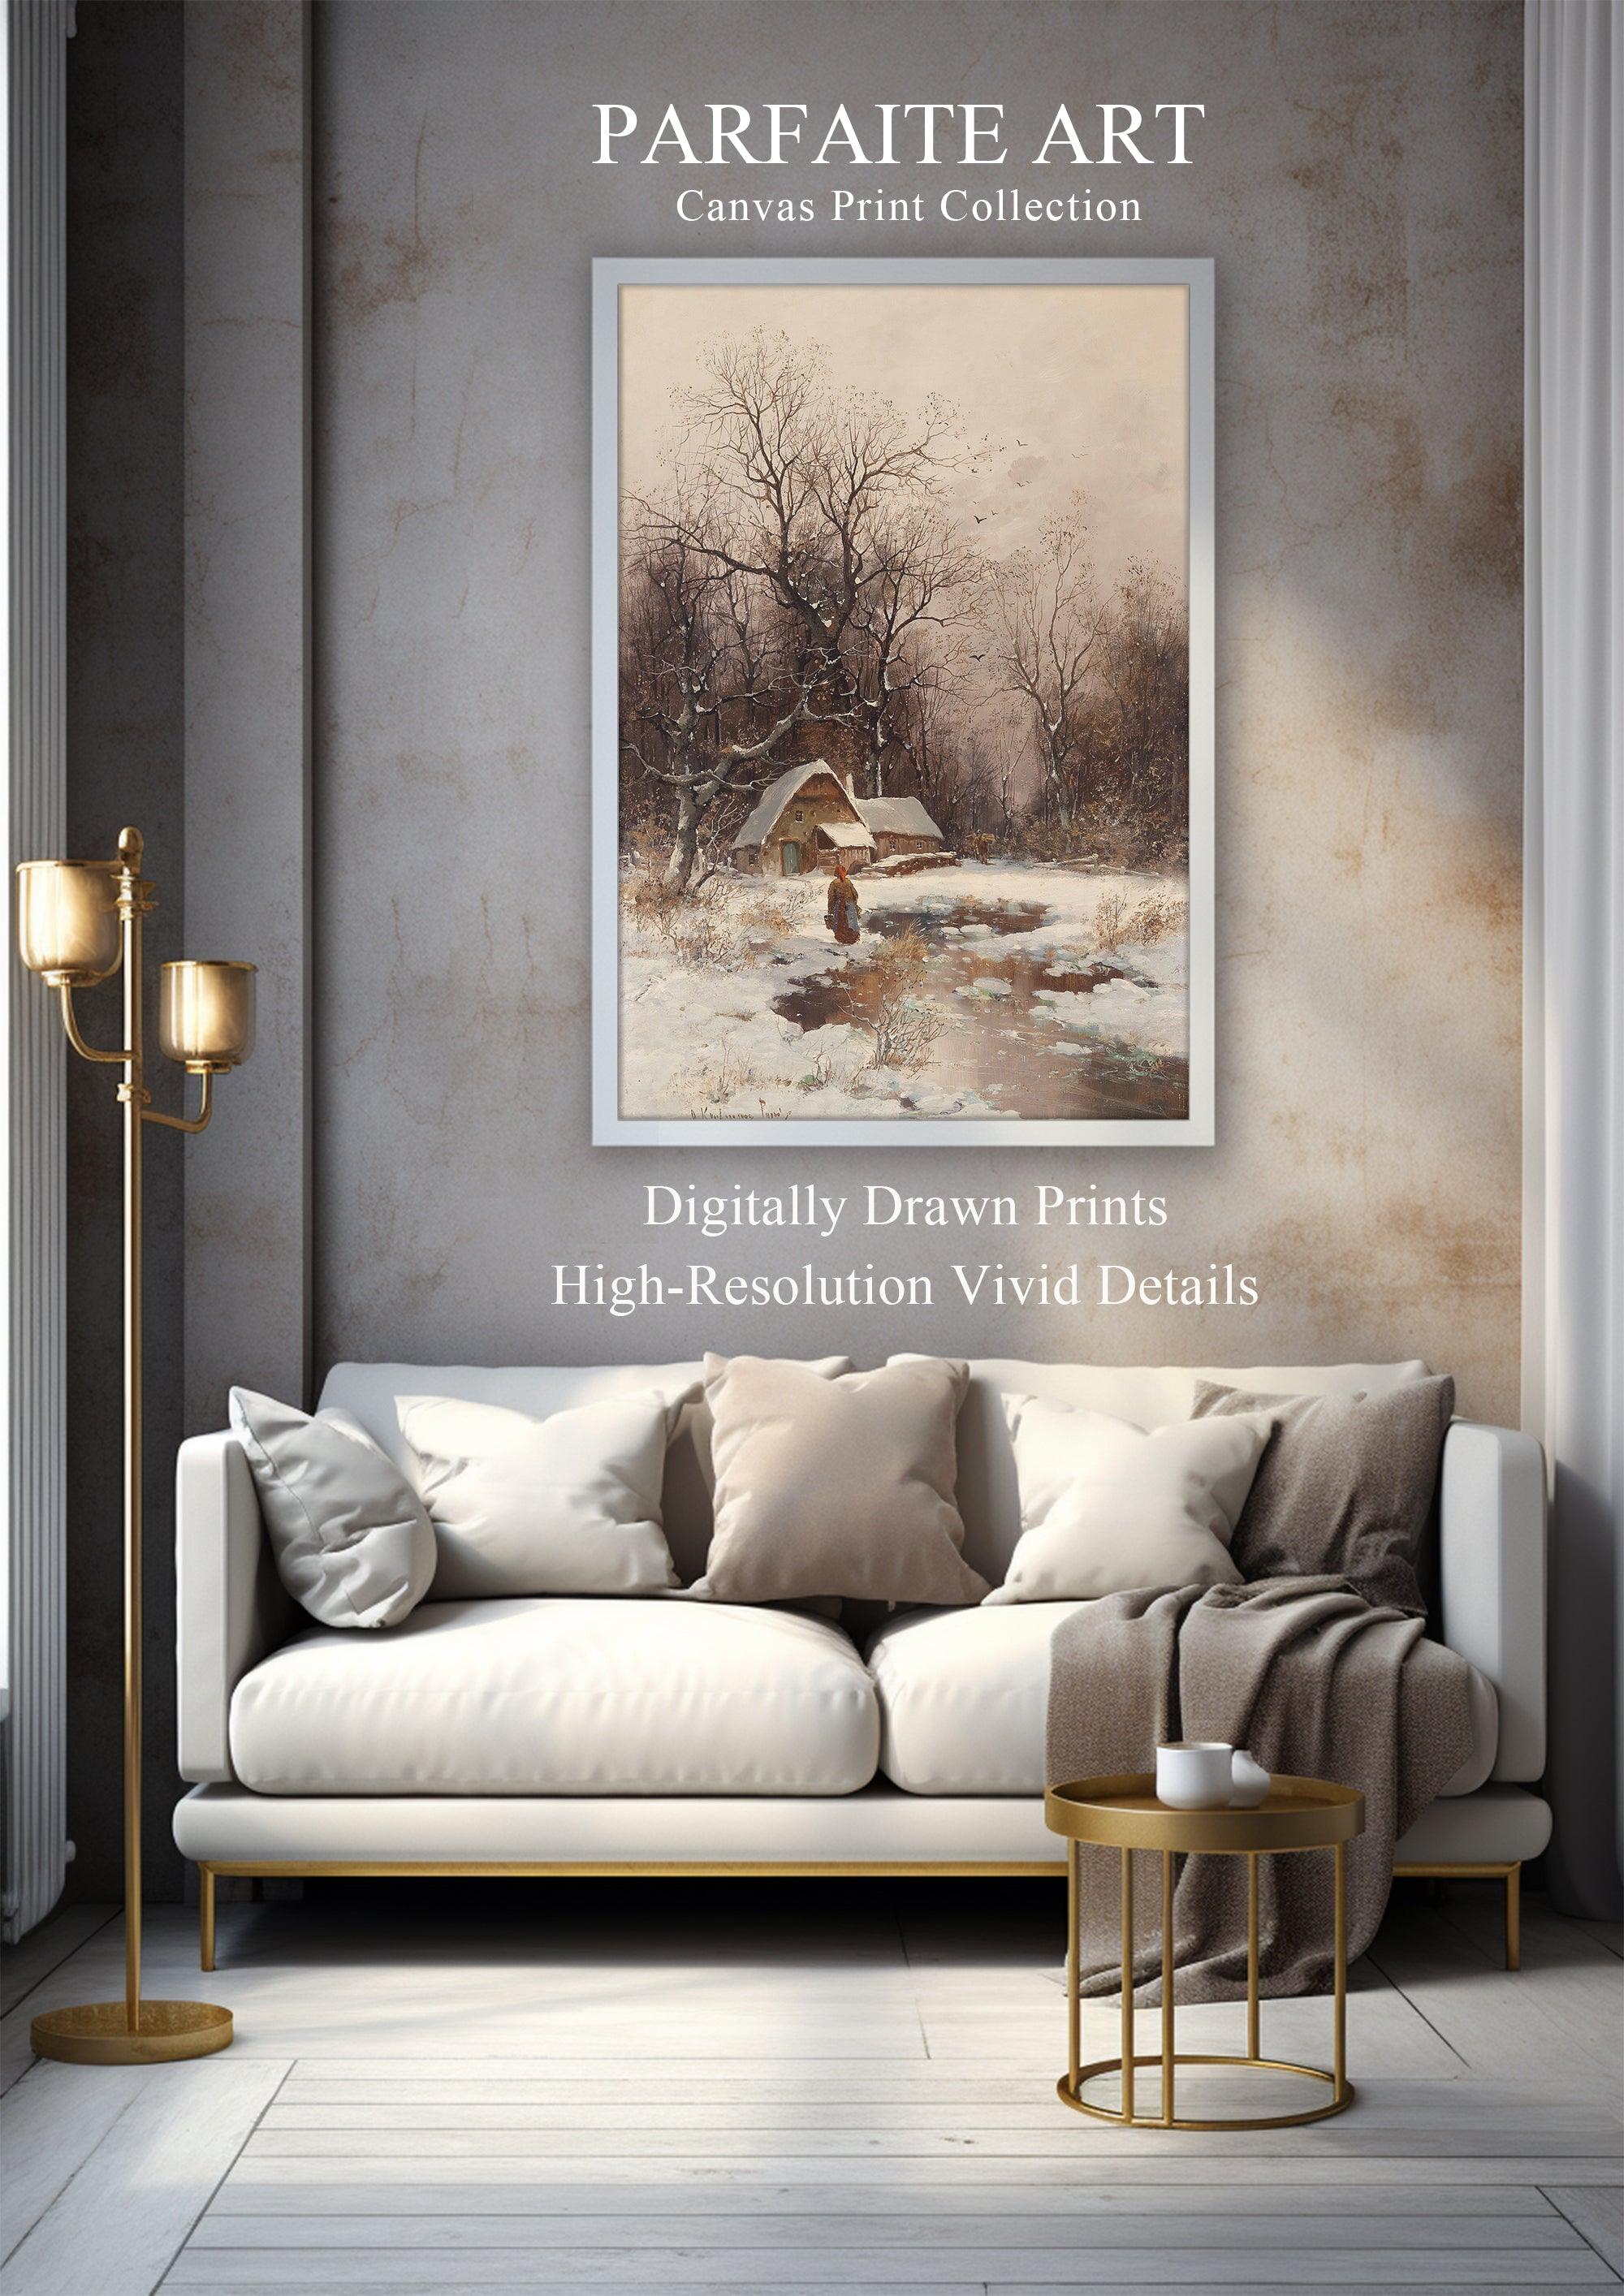 Landscape Canvas Painting Prints，World Famous Paintings Series，Moody Wall Decor，High-Quality Waterproof Decorative Canvas Art， Hotel Aisle Living Room Home Decor Art, Giclée Printing Technique